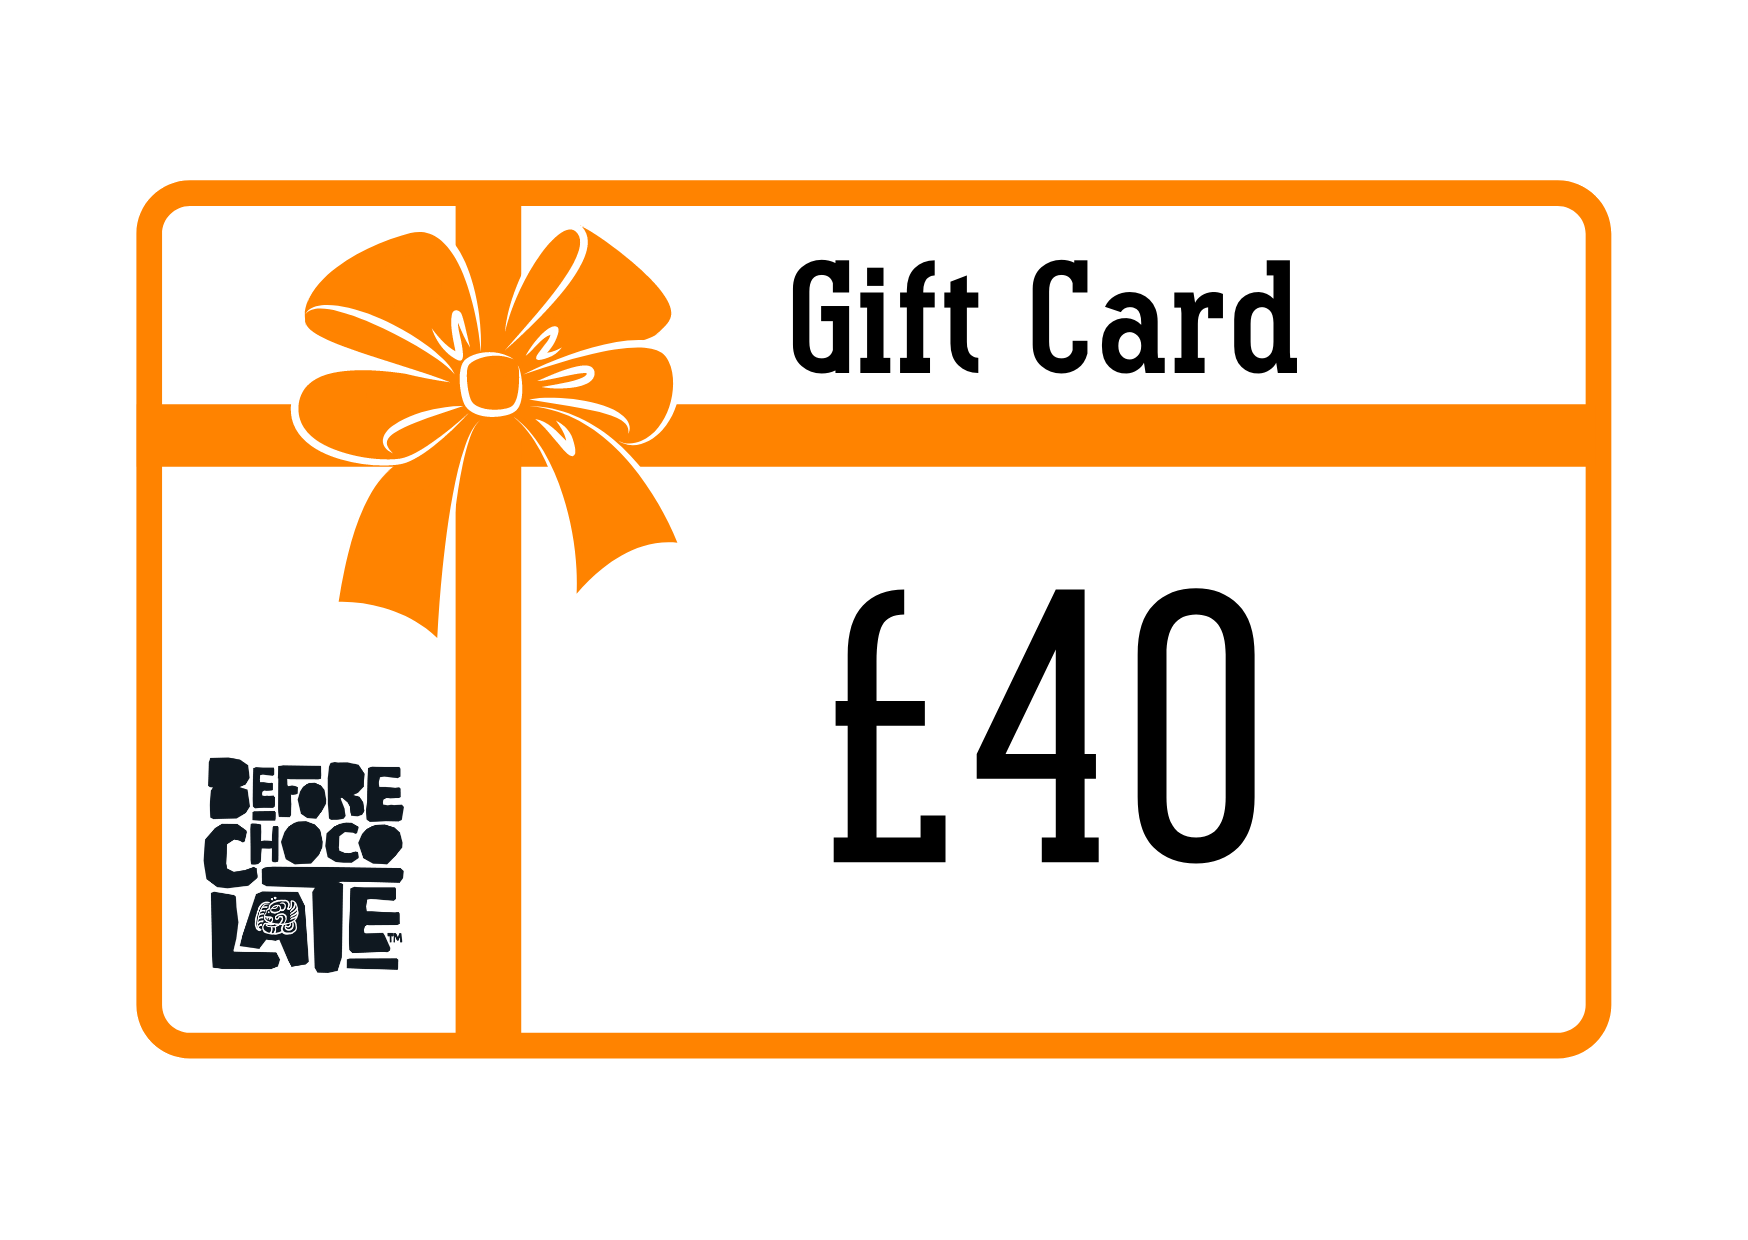 Before Chocolate Gift Card - £40